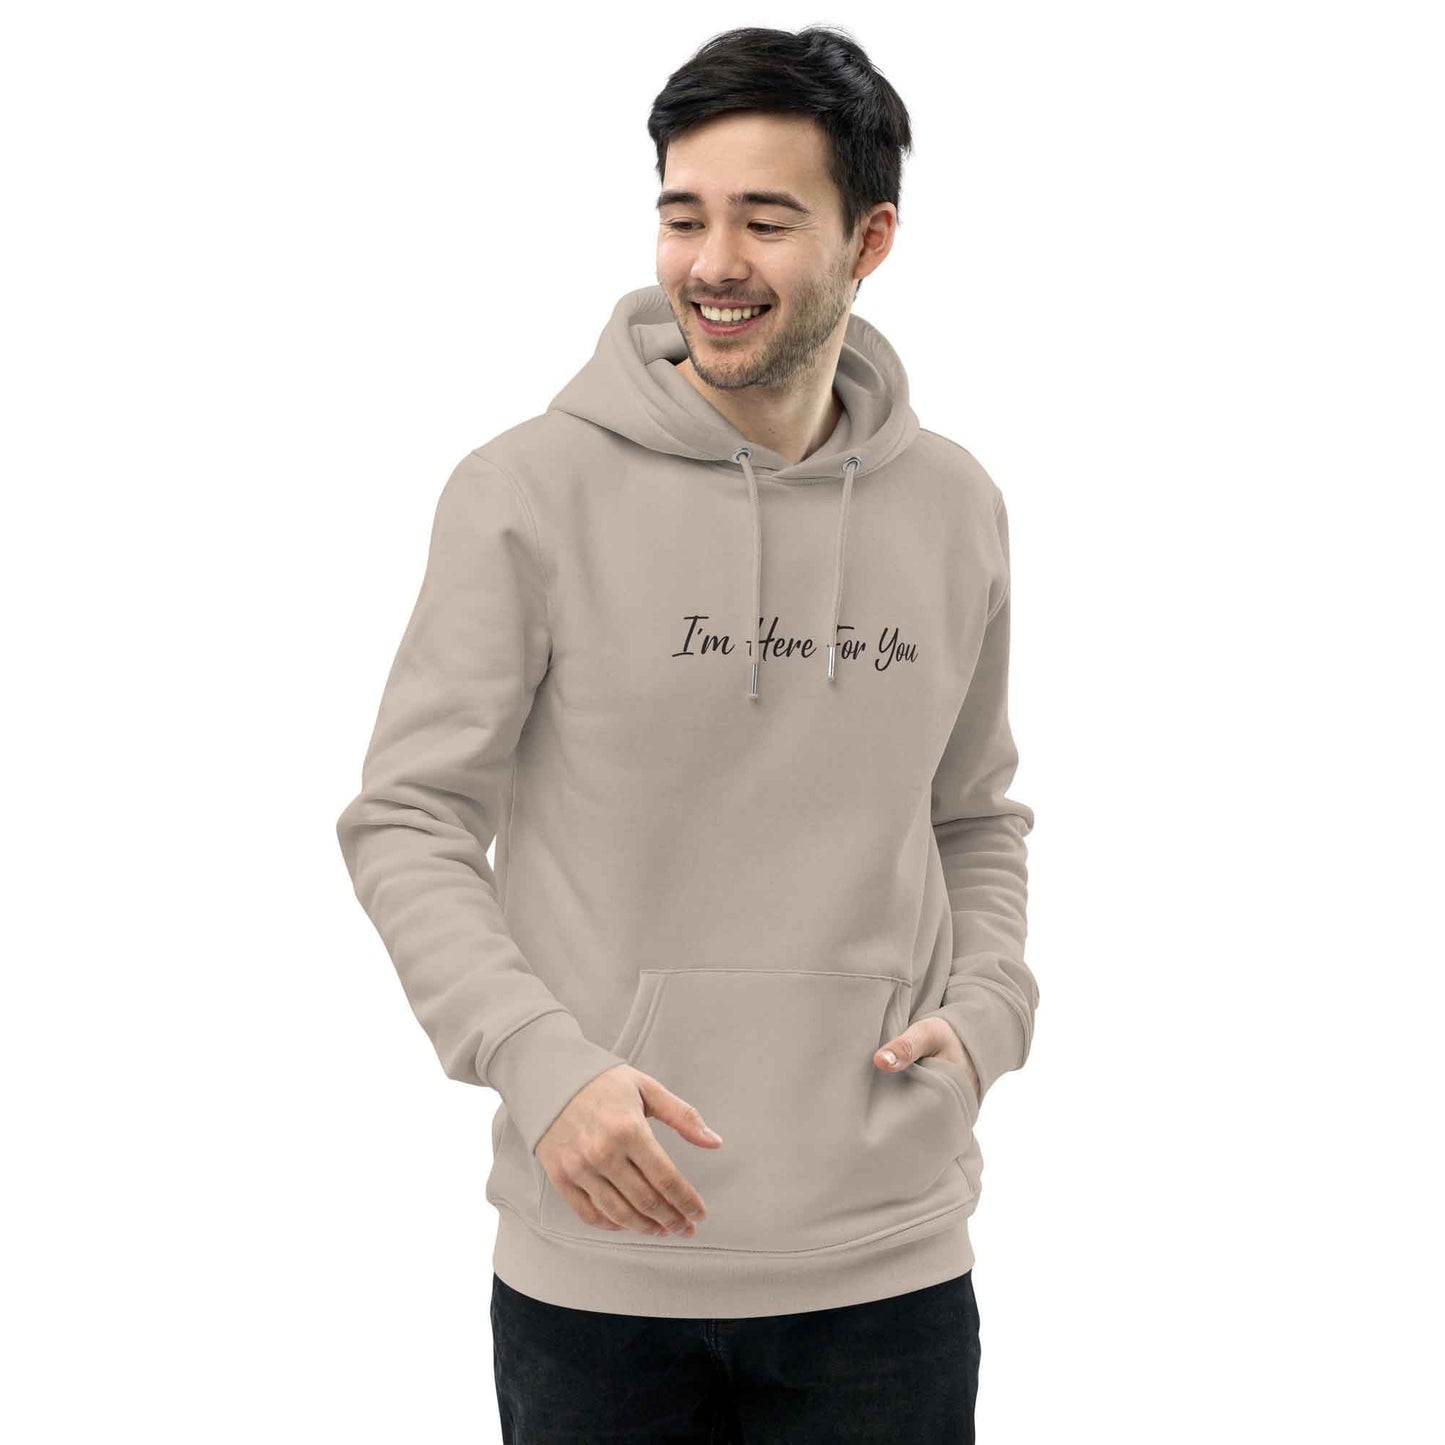 Men beige positive hoodie with inspirational quote, "I'm Here For You."